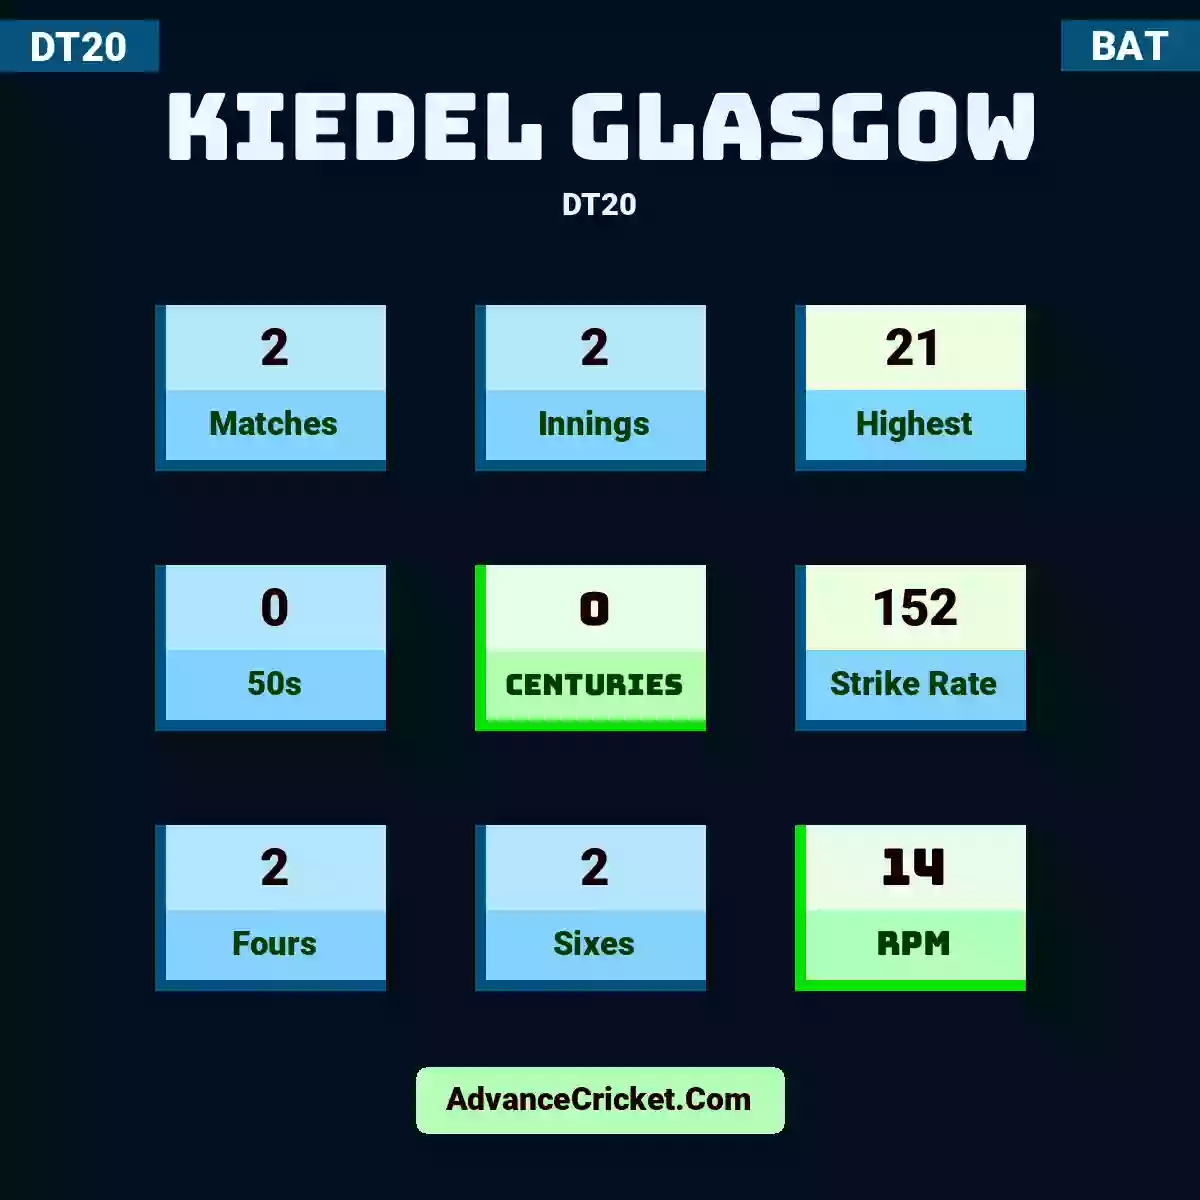 Kiedel Glasgow DT20 , Kiedel Glasgow played 2 matches, scored 21 runs as highest, 0 half-centuries, and 0 centuries, with a strike rate of 152. k.glasgow hit 2 fours and 2 sixes, with an RPM of 14.